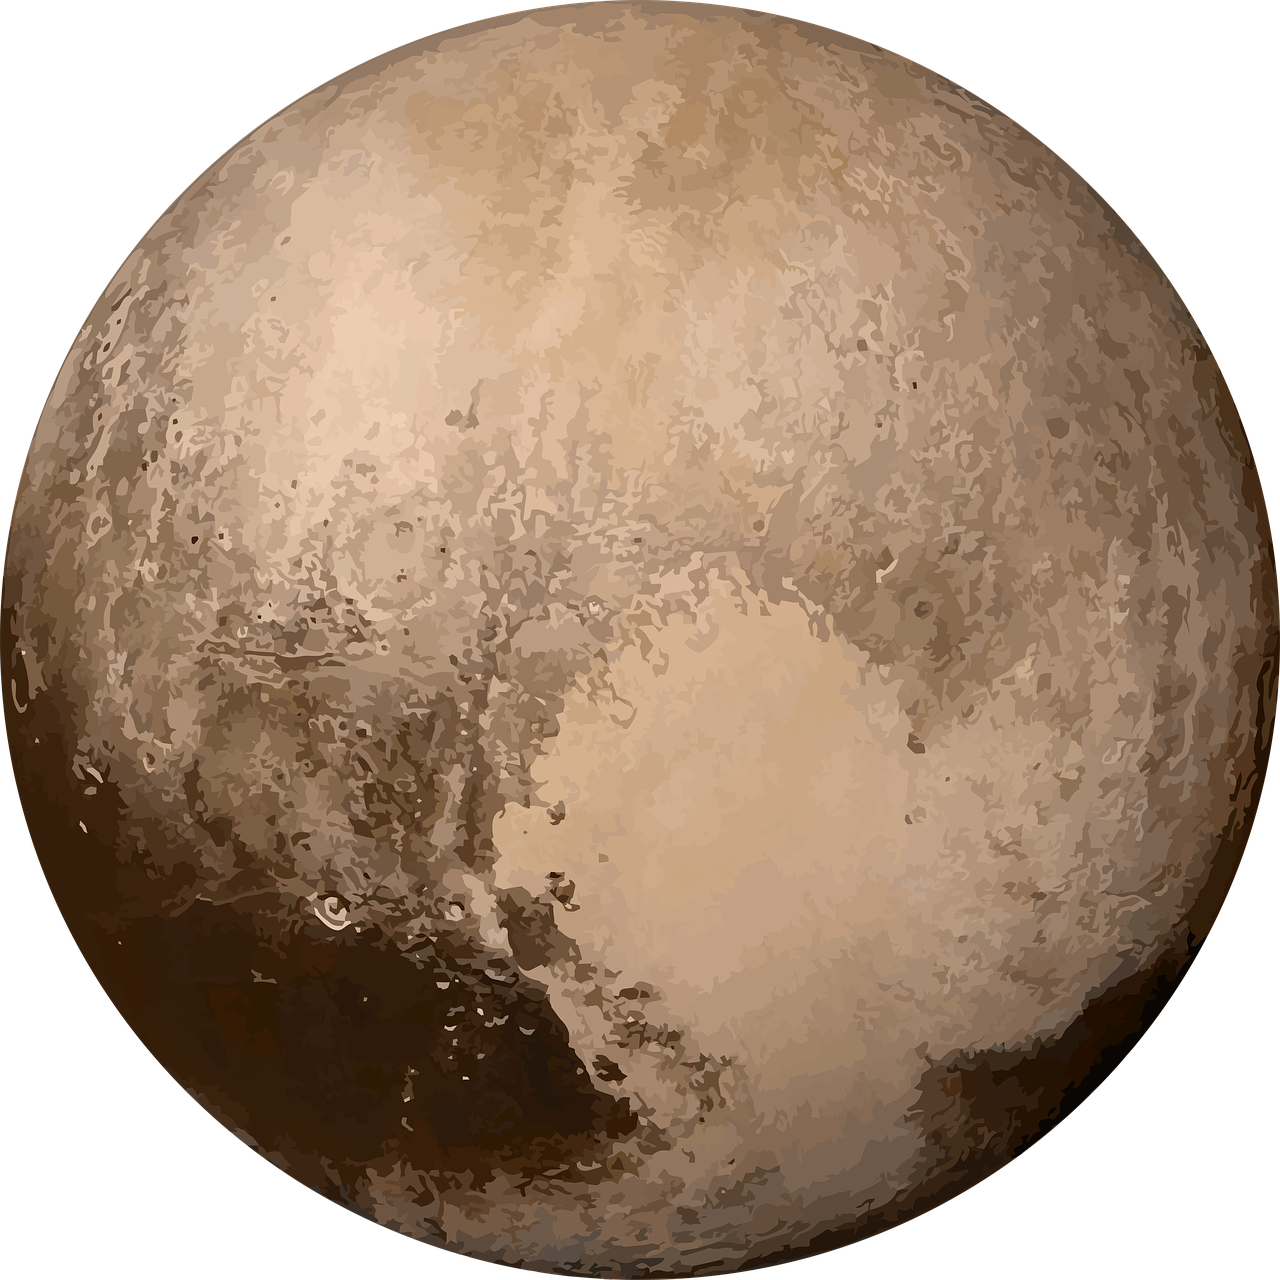 drawing of the planet pluto